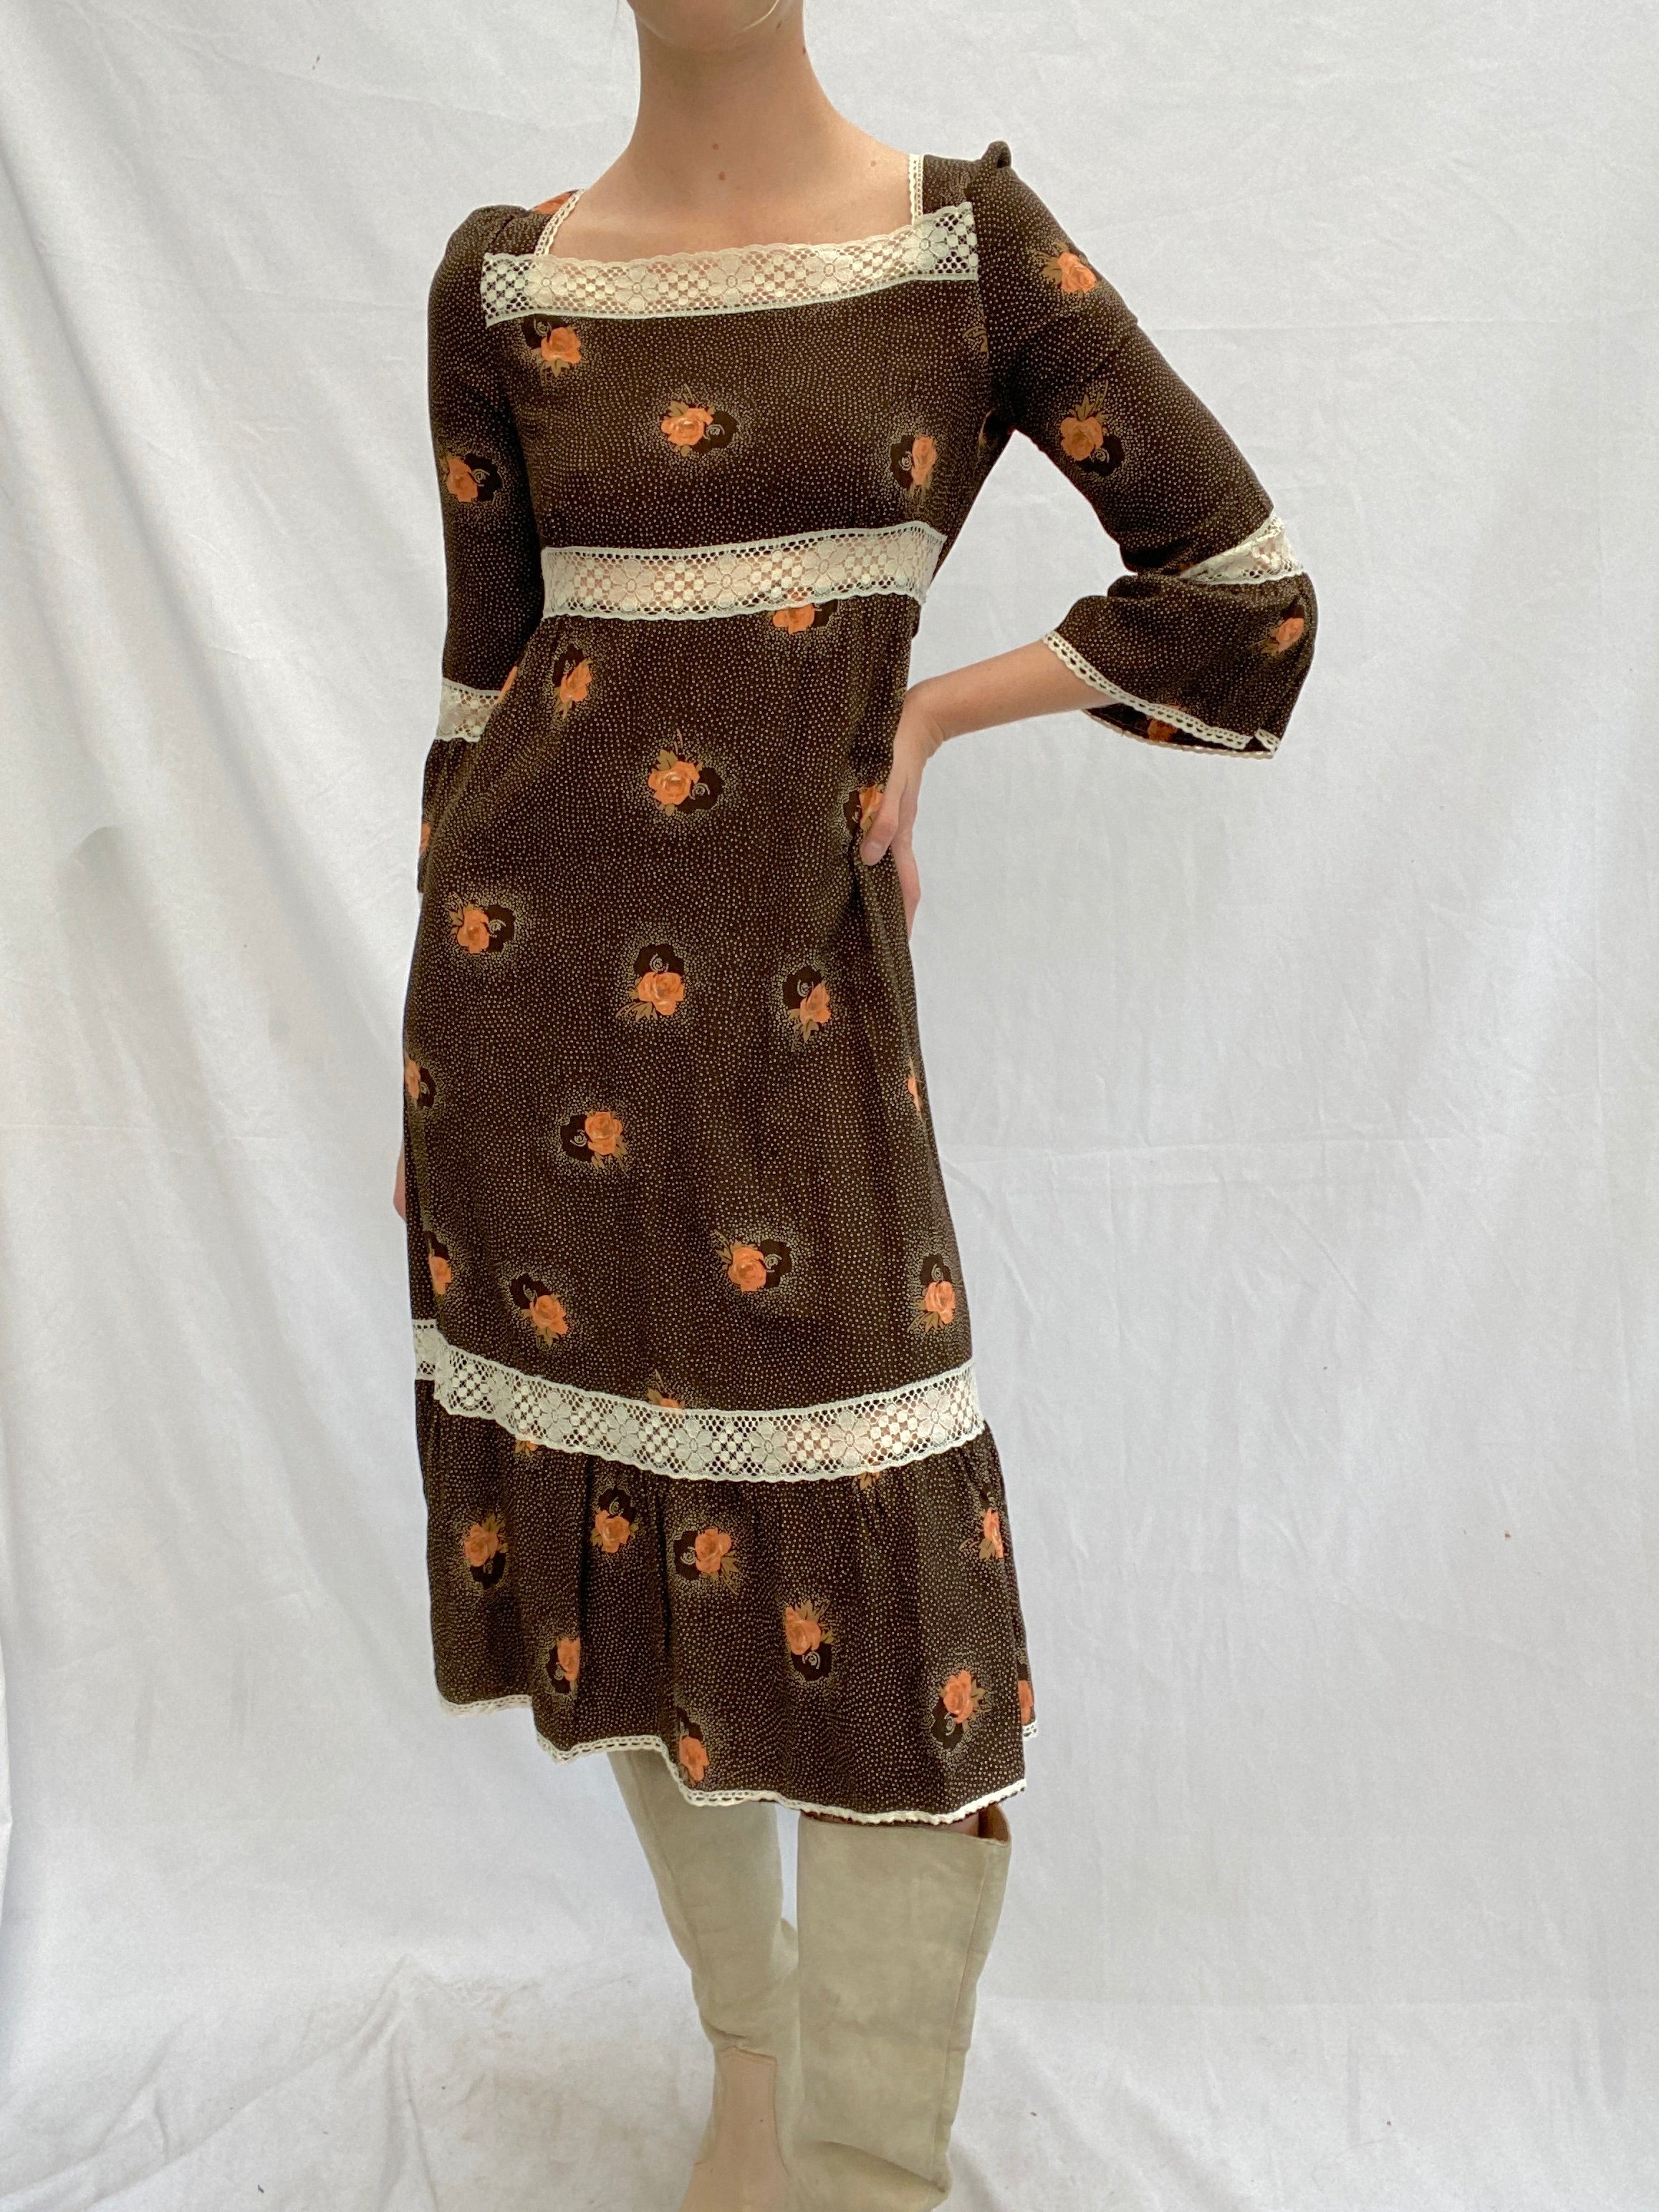 Long Sleeve Brown Floral Dress with White Lace